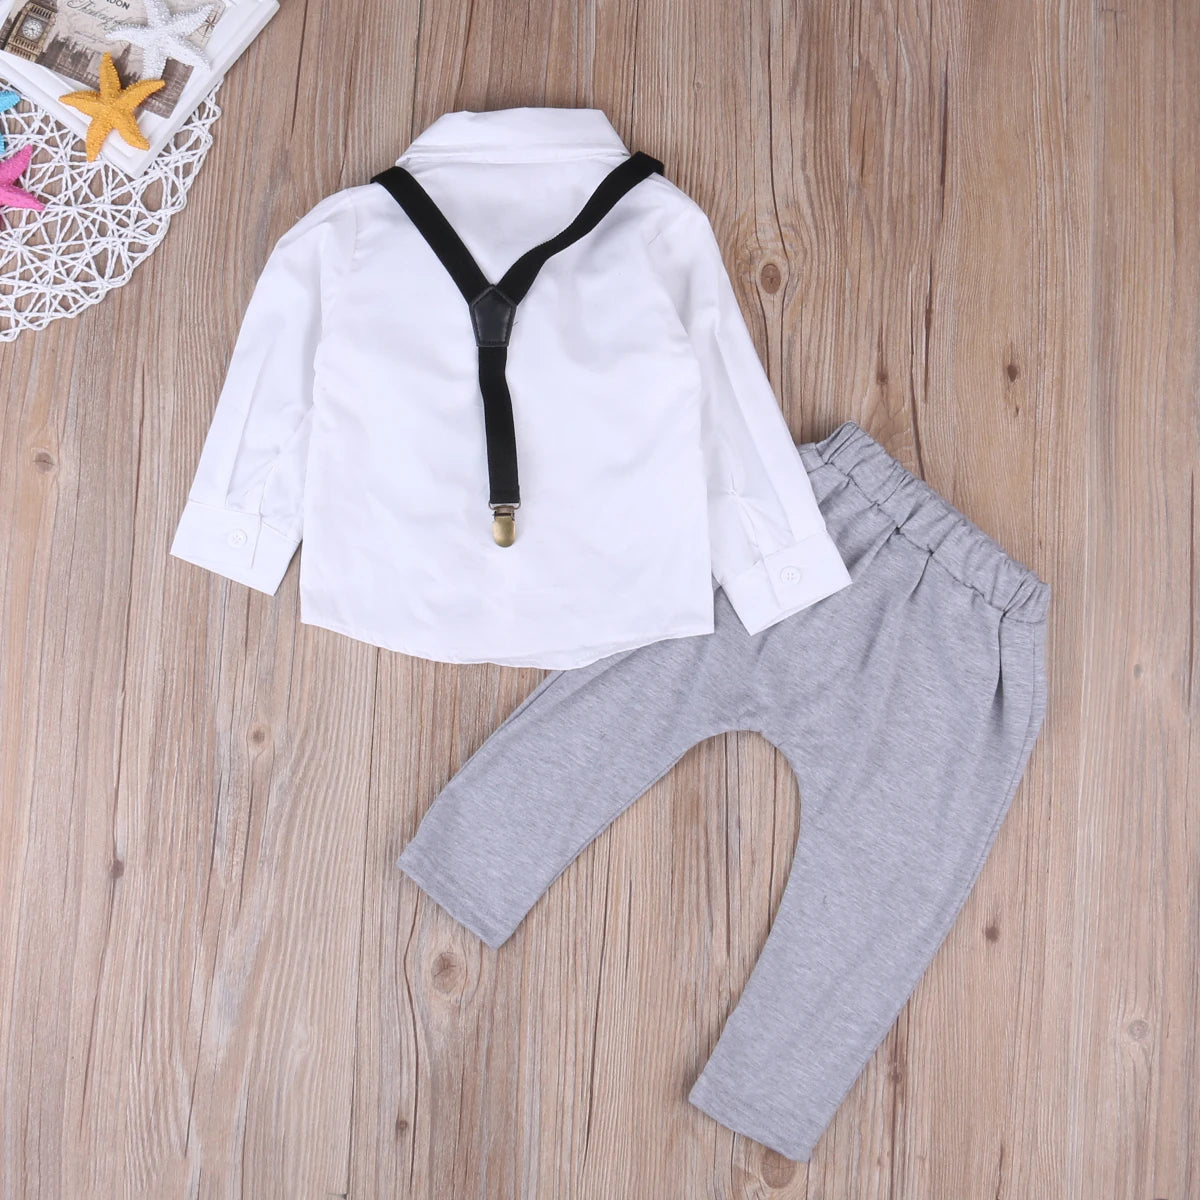 Newborn Infant Baby Boys Long Sleeve Bow-Tie Set Shirt Tops +Suspender Pants Outfit 